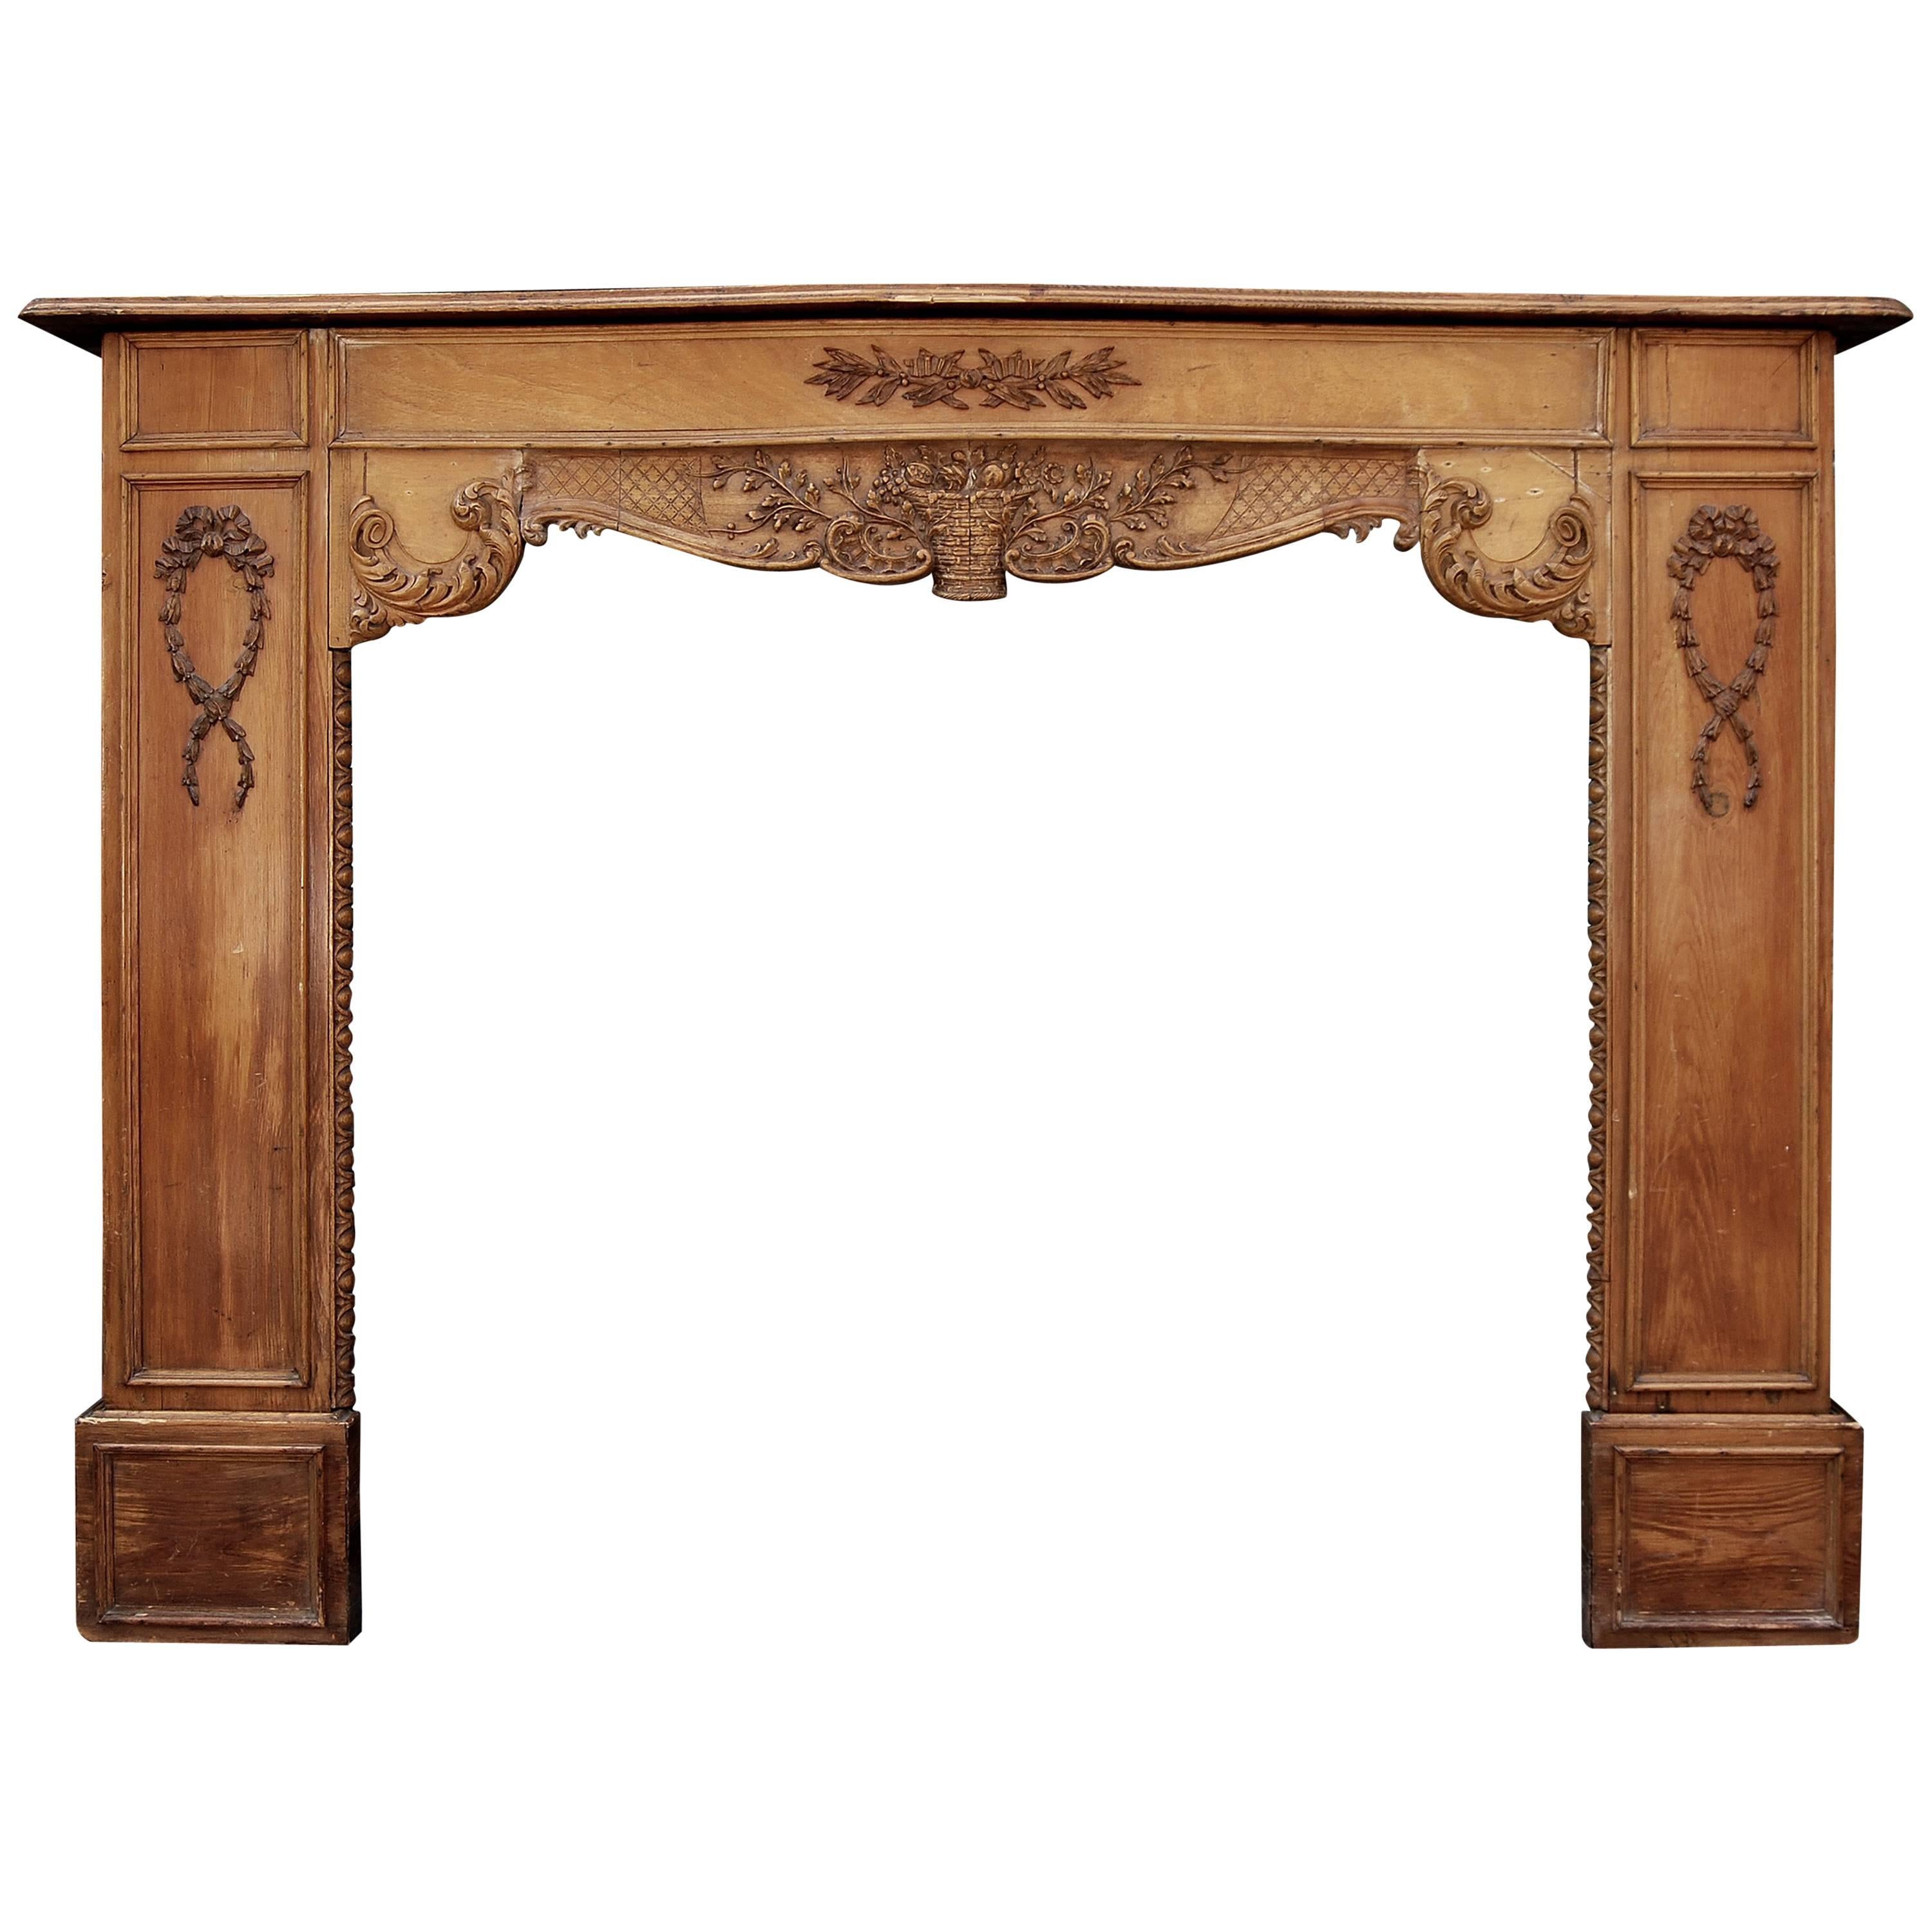 Late 19th-Early 20th Century English Carved Wood Fireplace For Sale